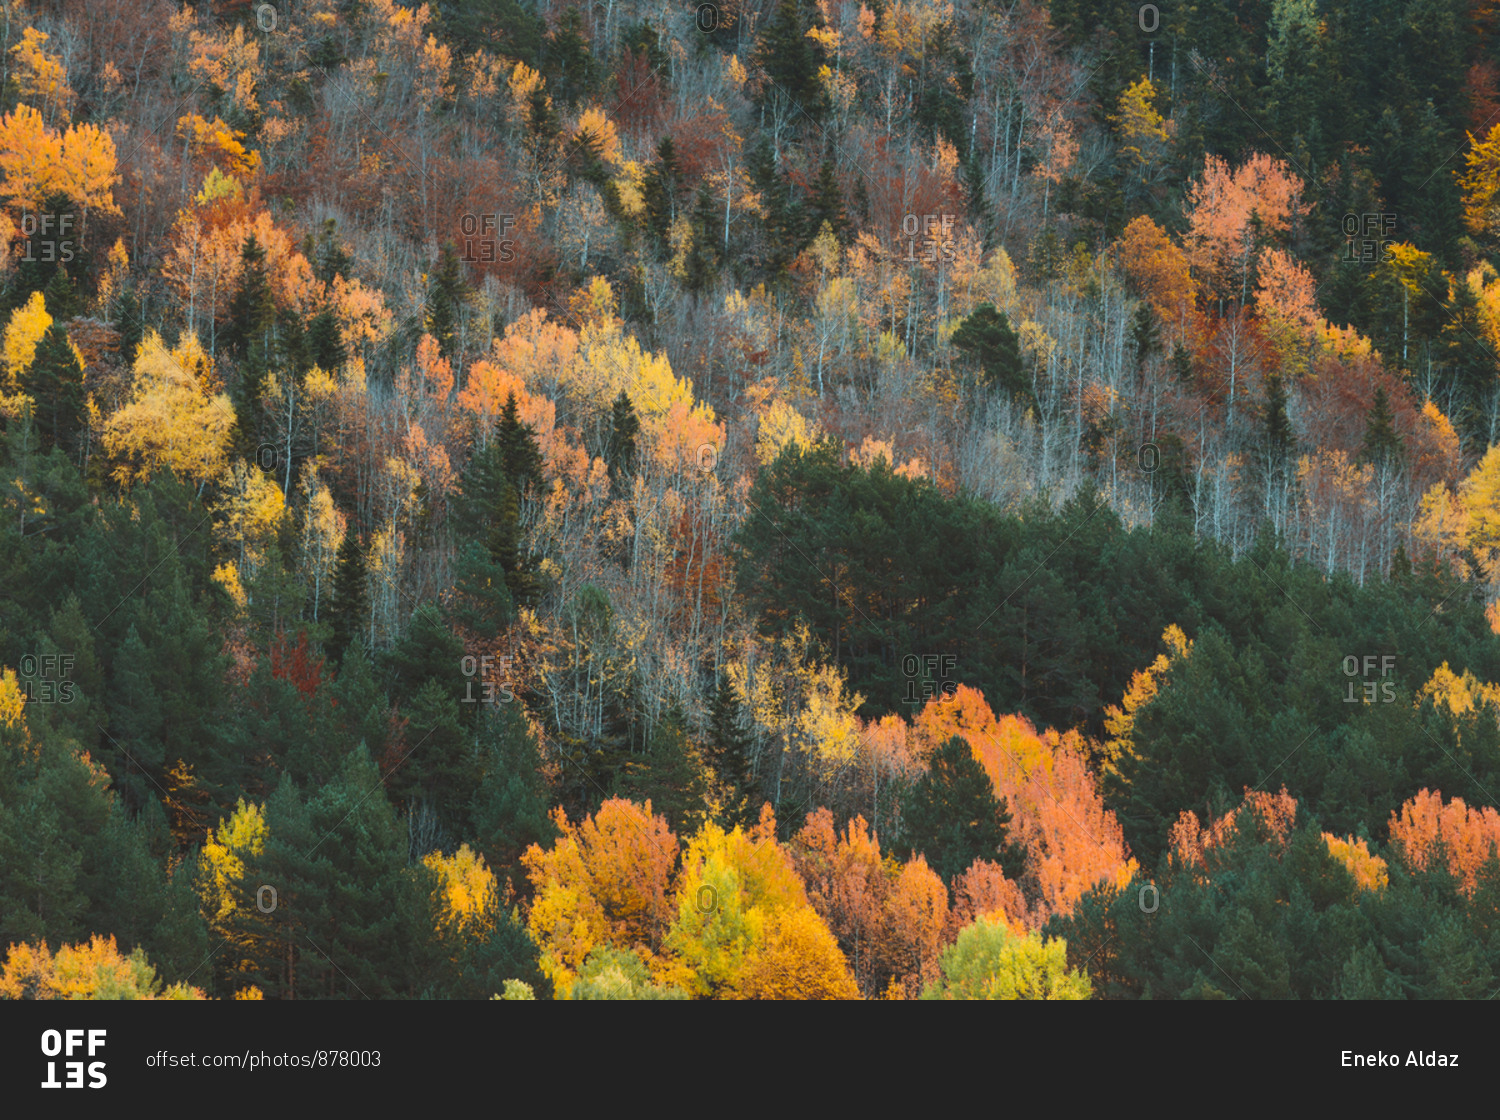 Colorful forest during autumn in Pyrenees, Aran Valley in Spain